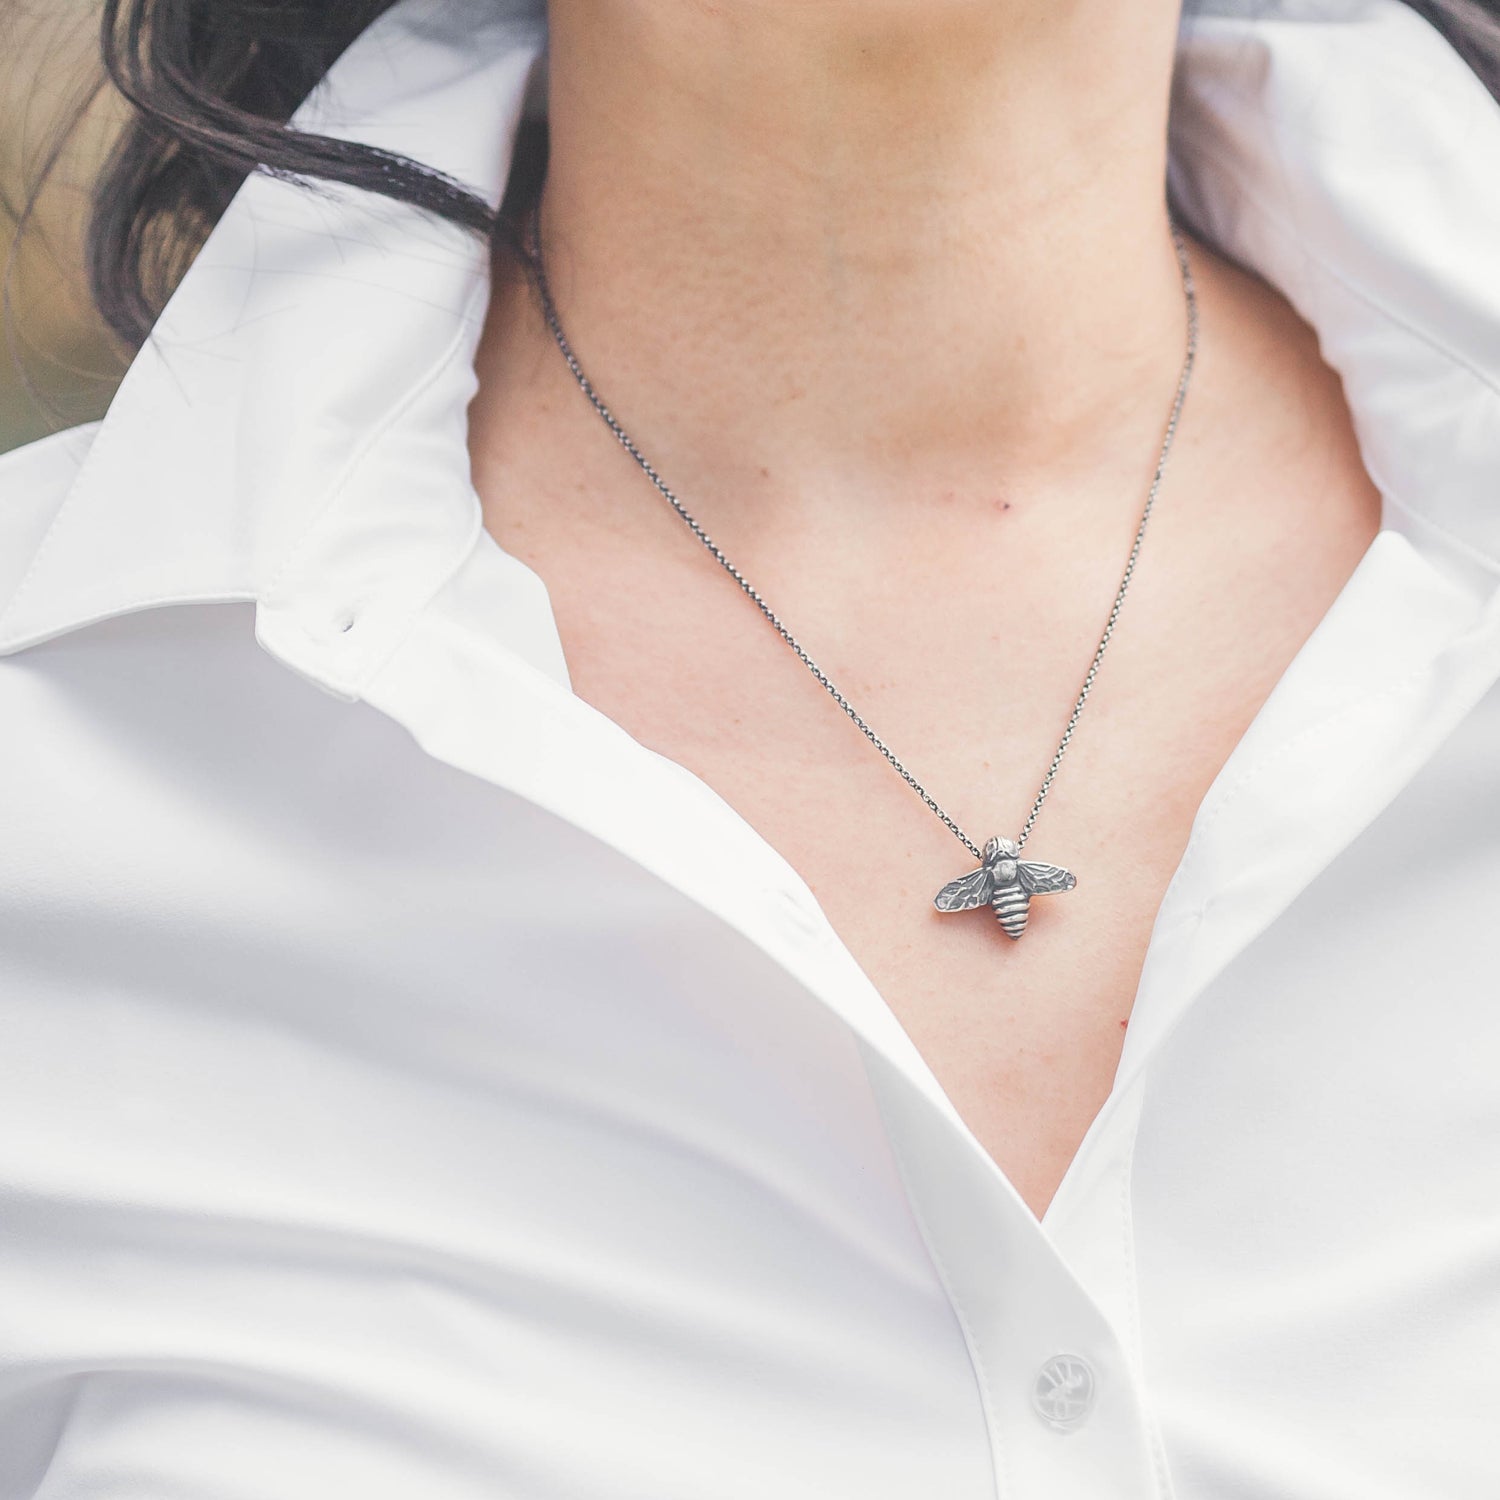 The Silver Honey Bee Necklace